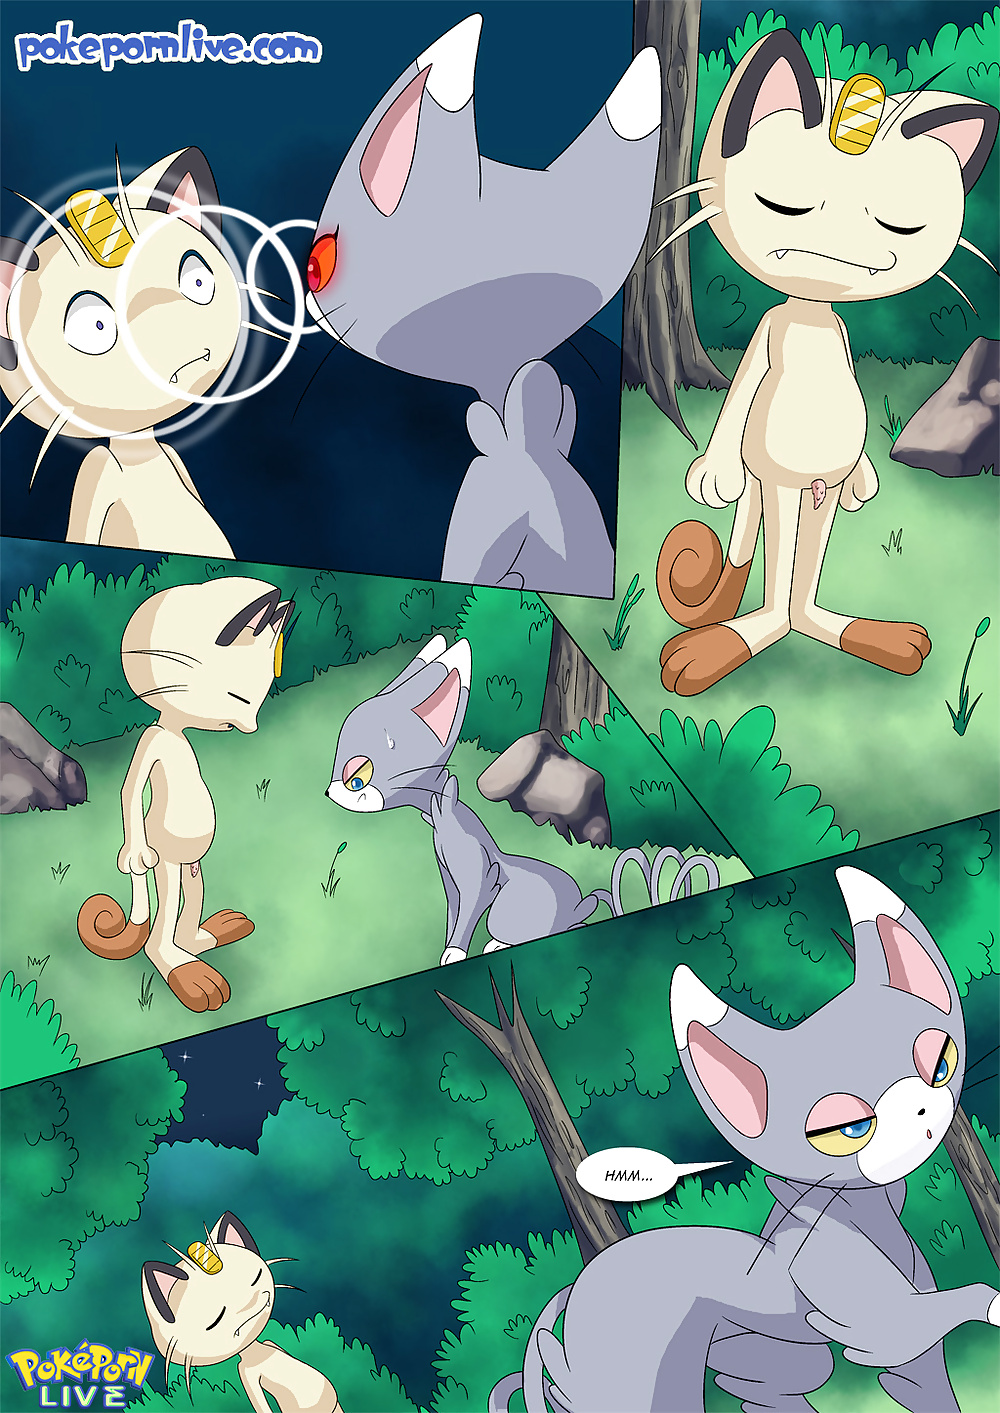 Pokeporn live-the cat's meowth
 #35303252